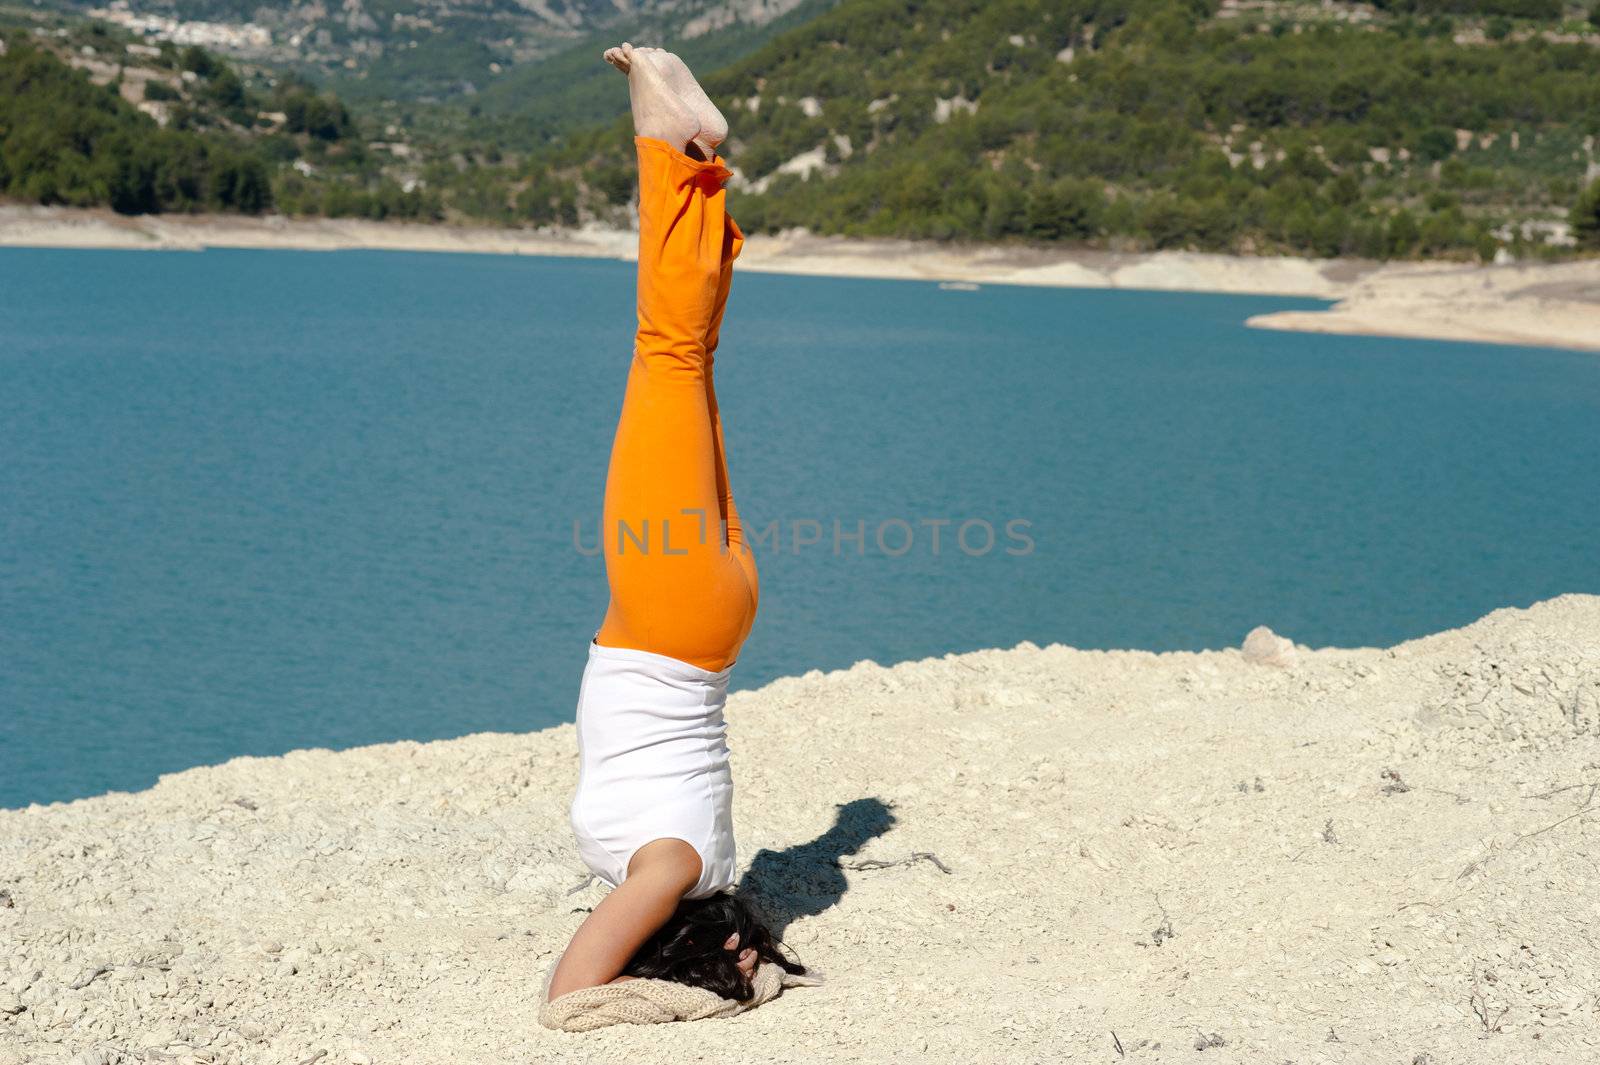 Fit and balanced woman doing a yoga handstand outdoors